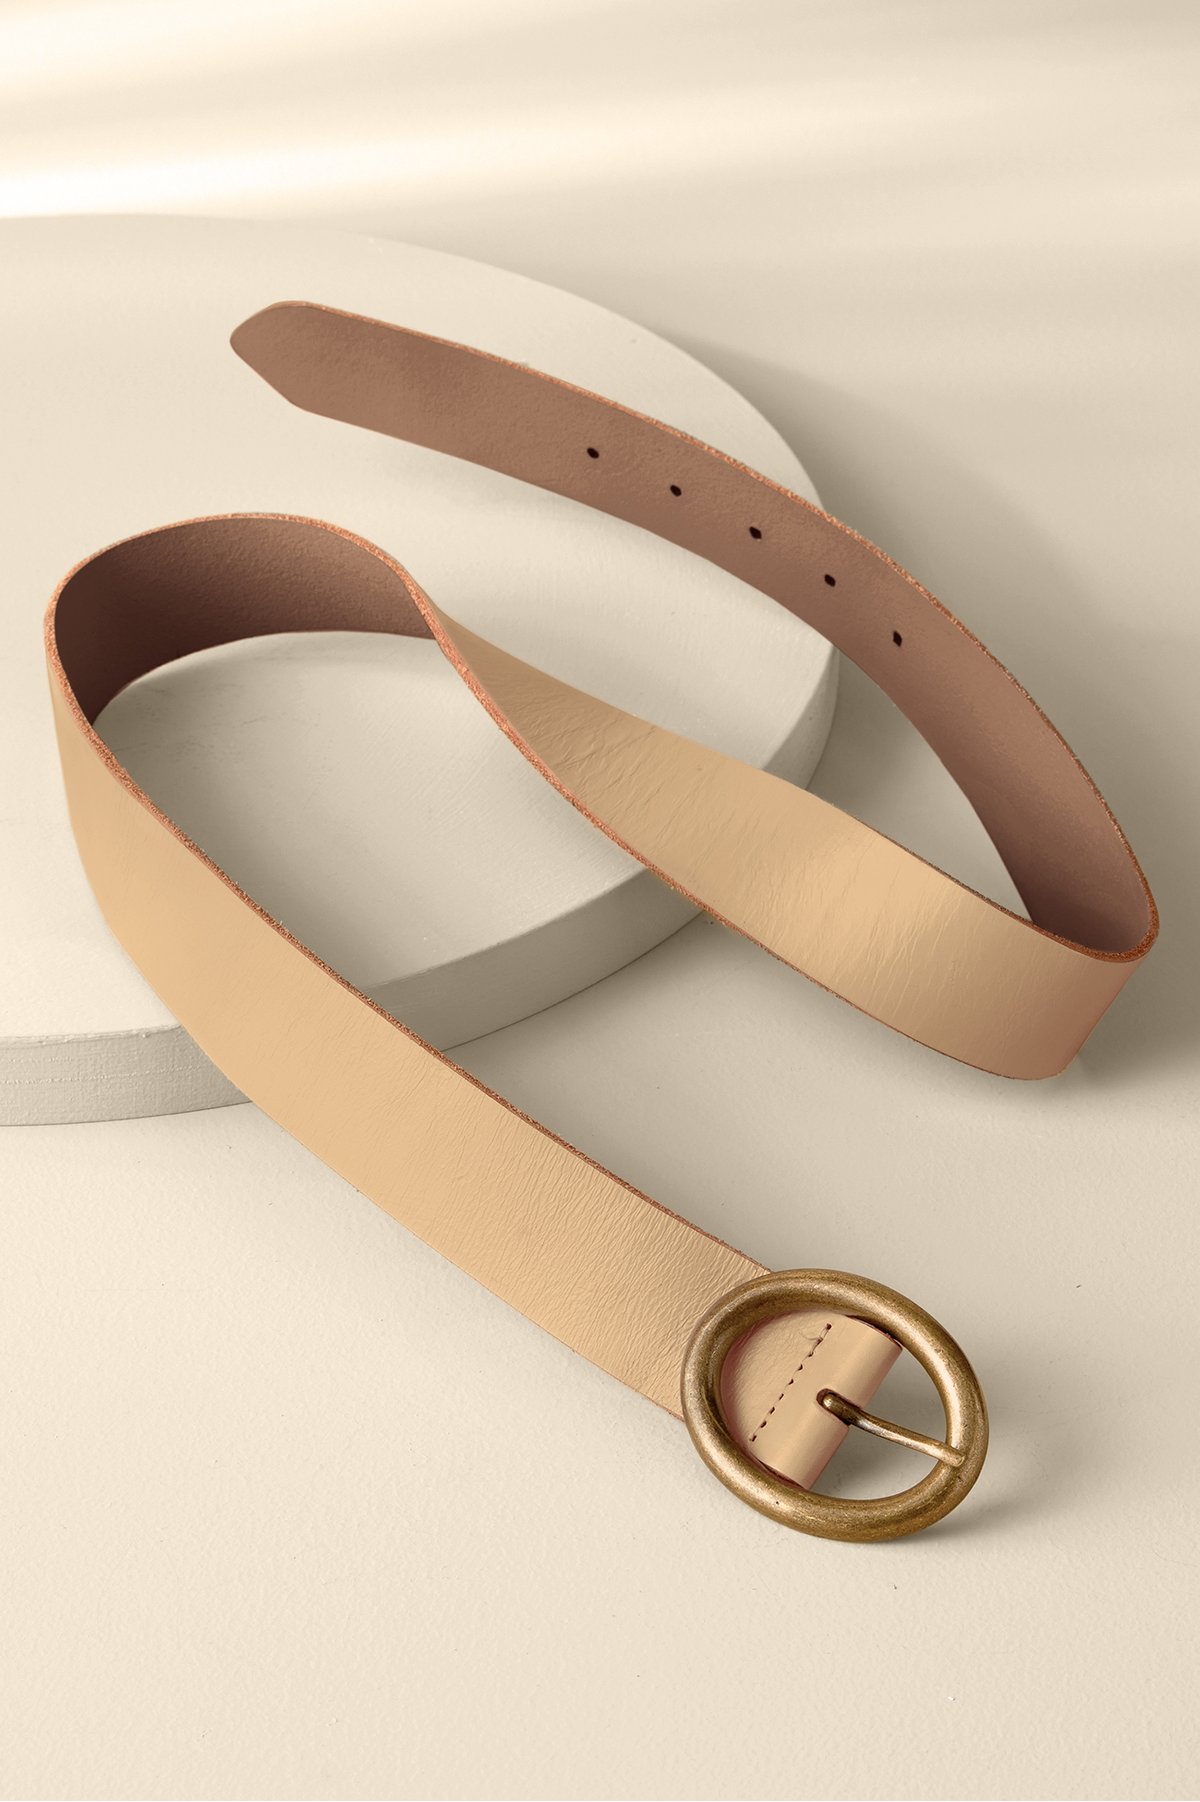 Monaco Leather Belt by Soft Surroundings, in Pale Natural size XS (2/4)